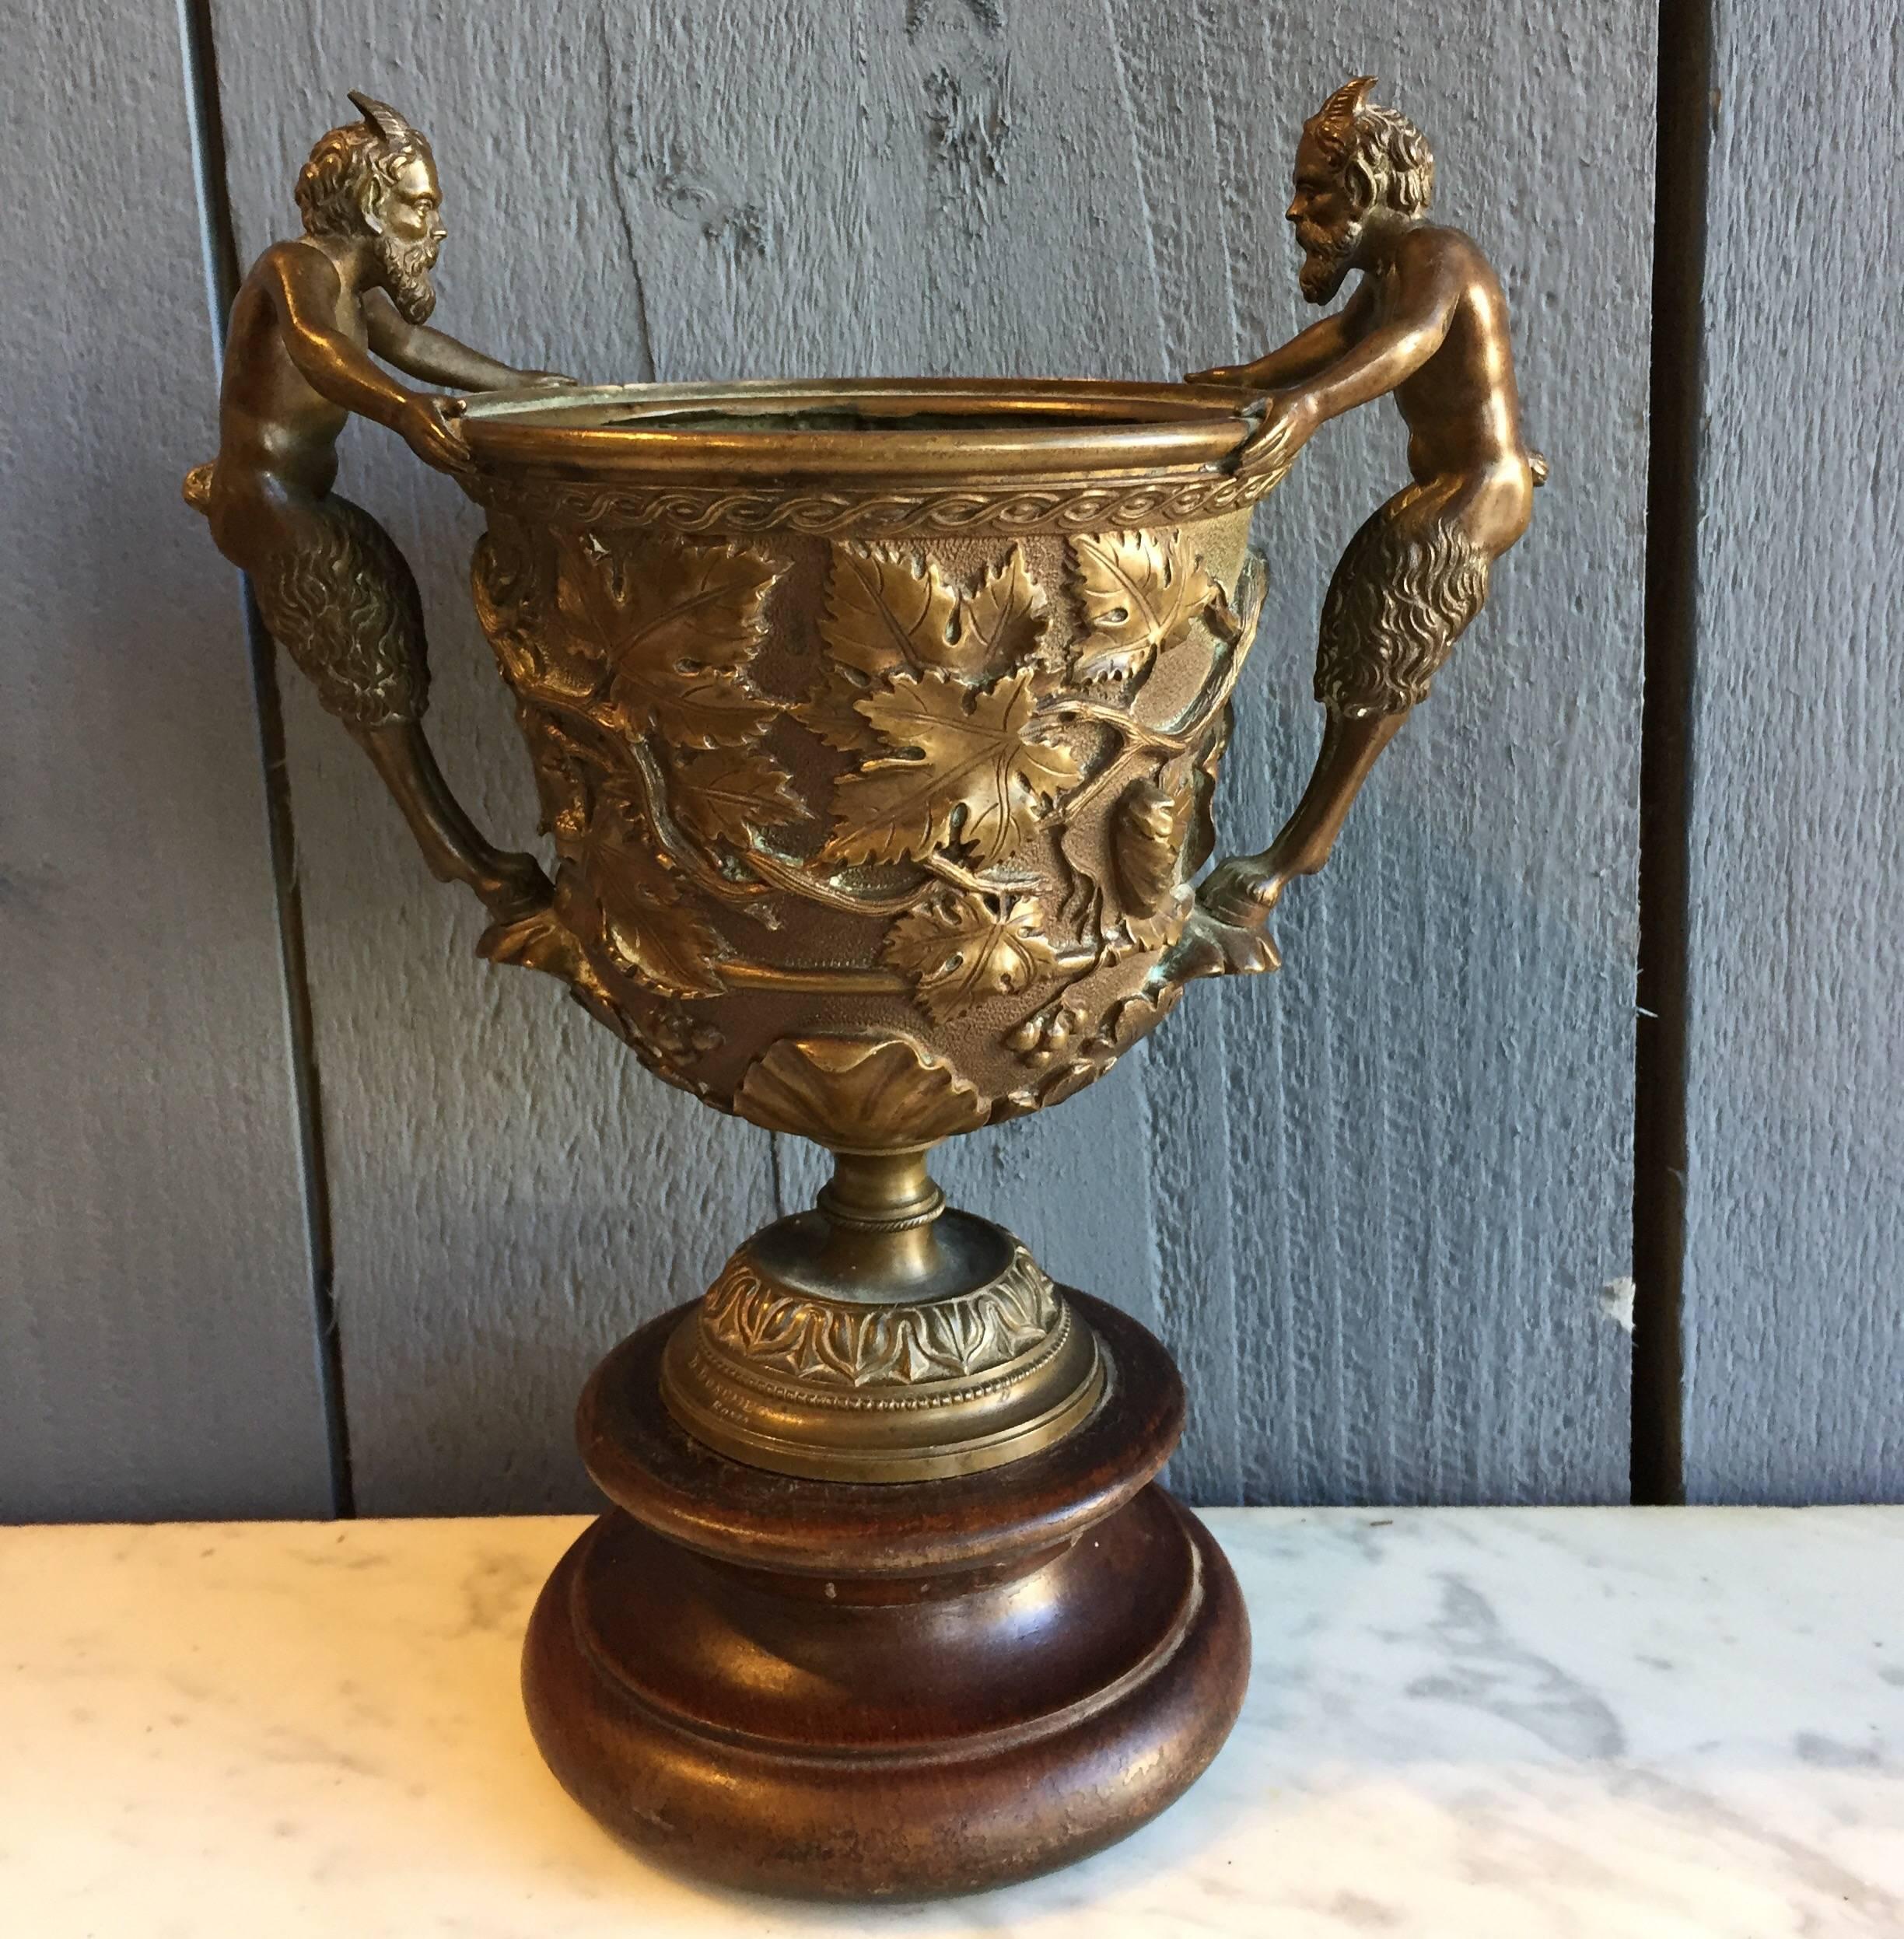 A beautiful Grand Tour patinated bronze cup. Having two nicely executed Faun figure handles. Scrolling leaf and fruit relief to the body and acanthus leaf to the lower part of the vessel. Standing on a turned wooden base. Highly decorative and